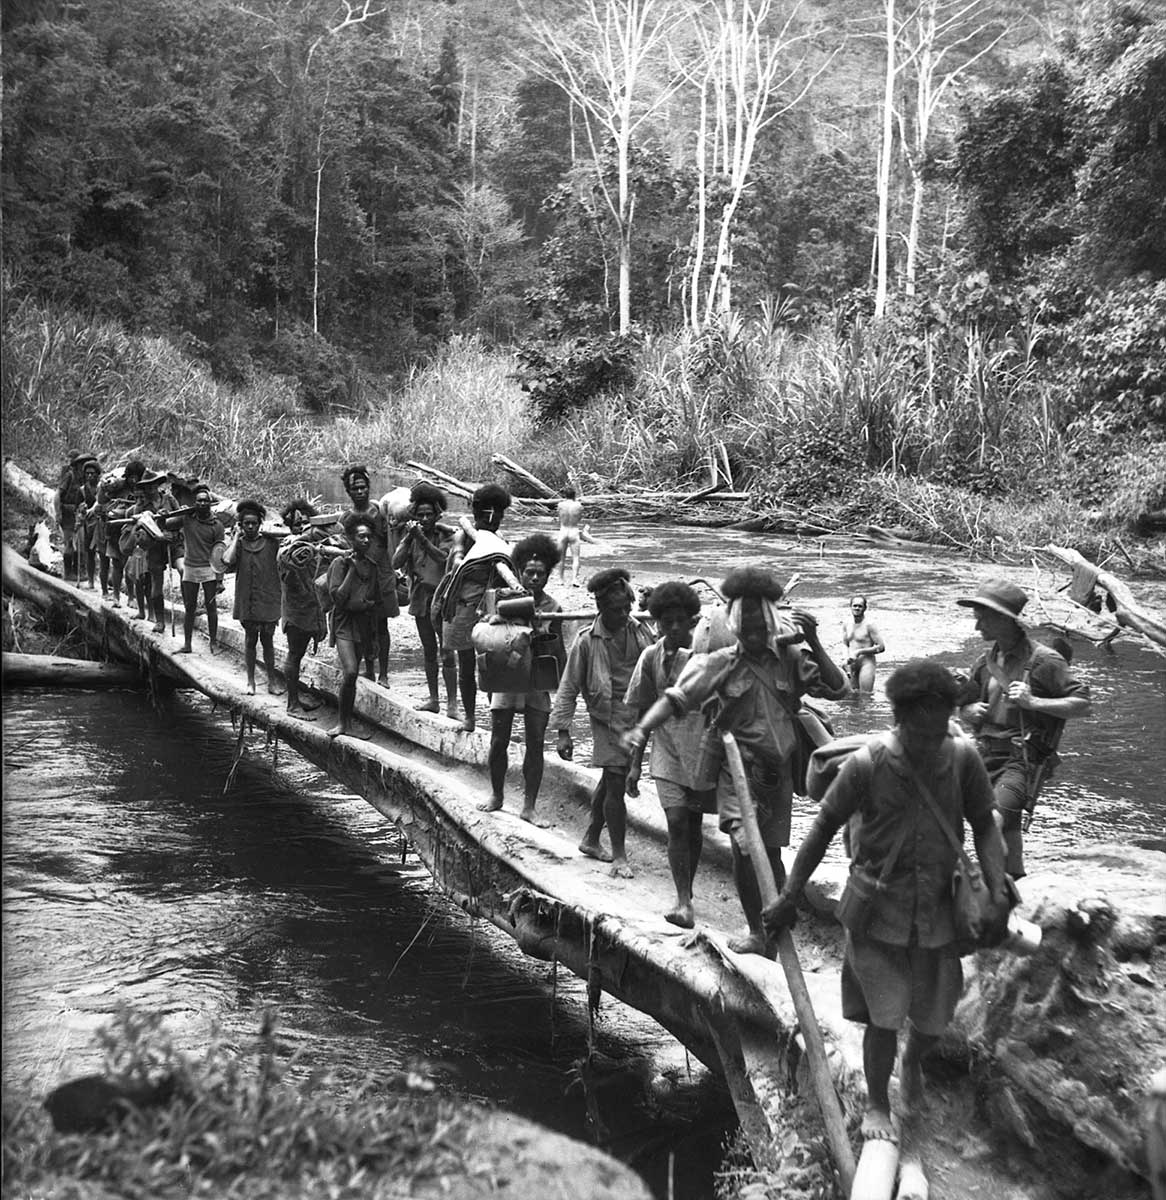 Black and white photograph of Papuan people carrying equipment across a makeshift bridge across a river. Soldiers can be seen bathing in the river.